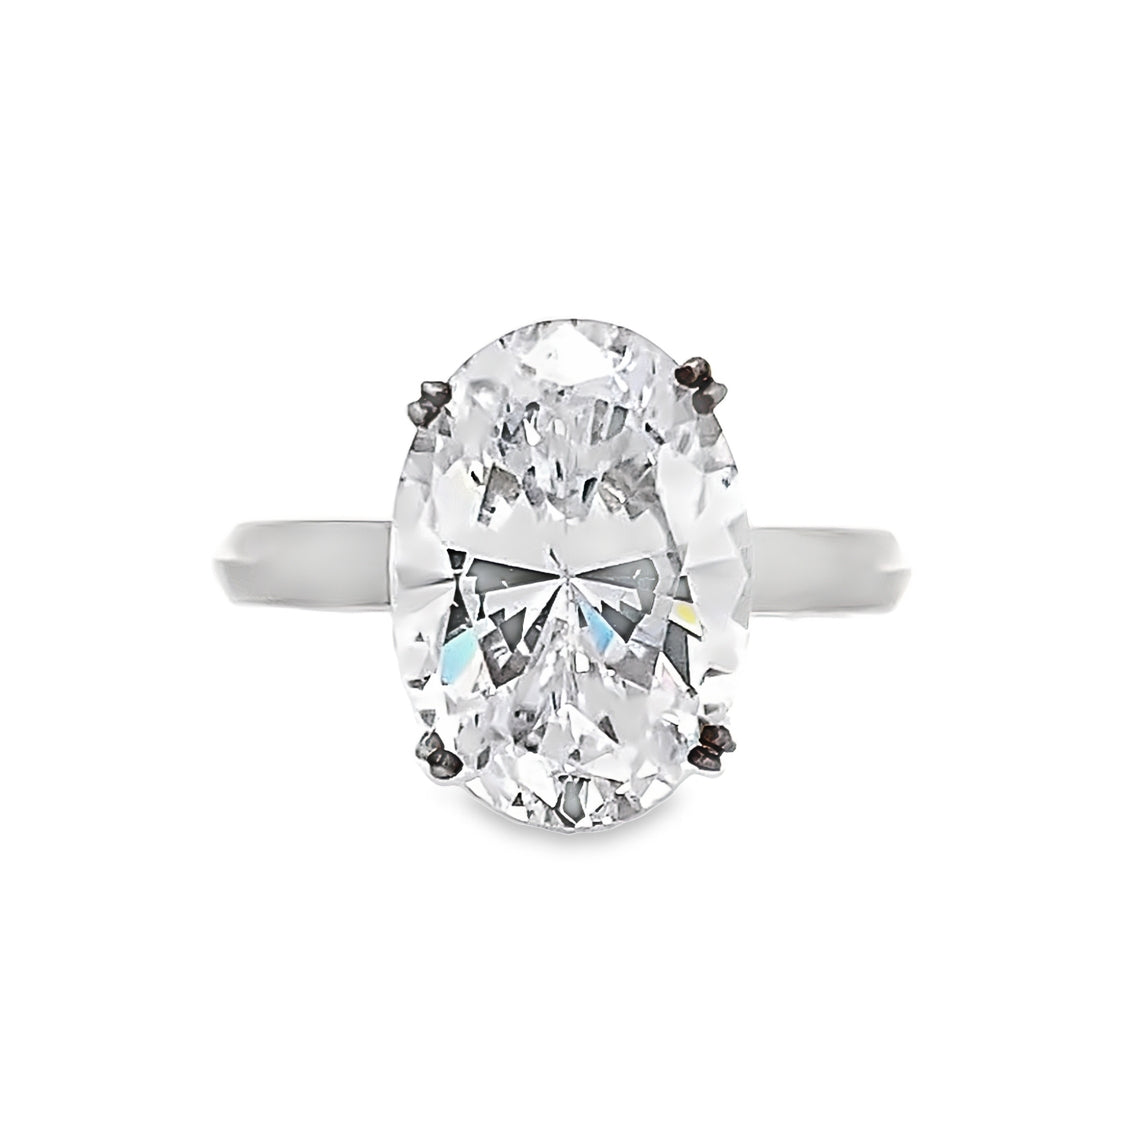 Beeghly & Co. 14 Karat White Gold Solitaire Oval Engagement Ring BCR-12